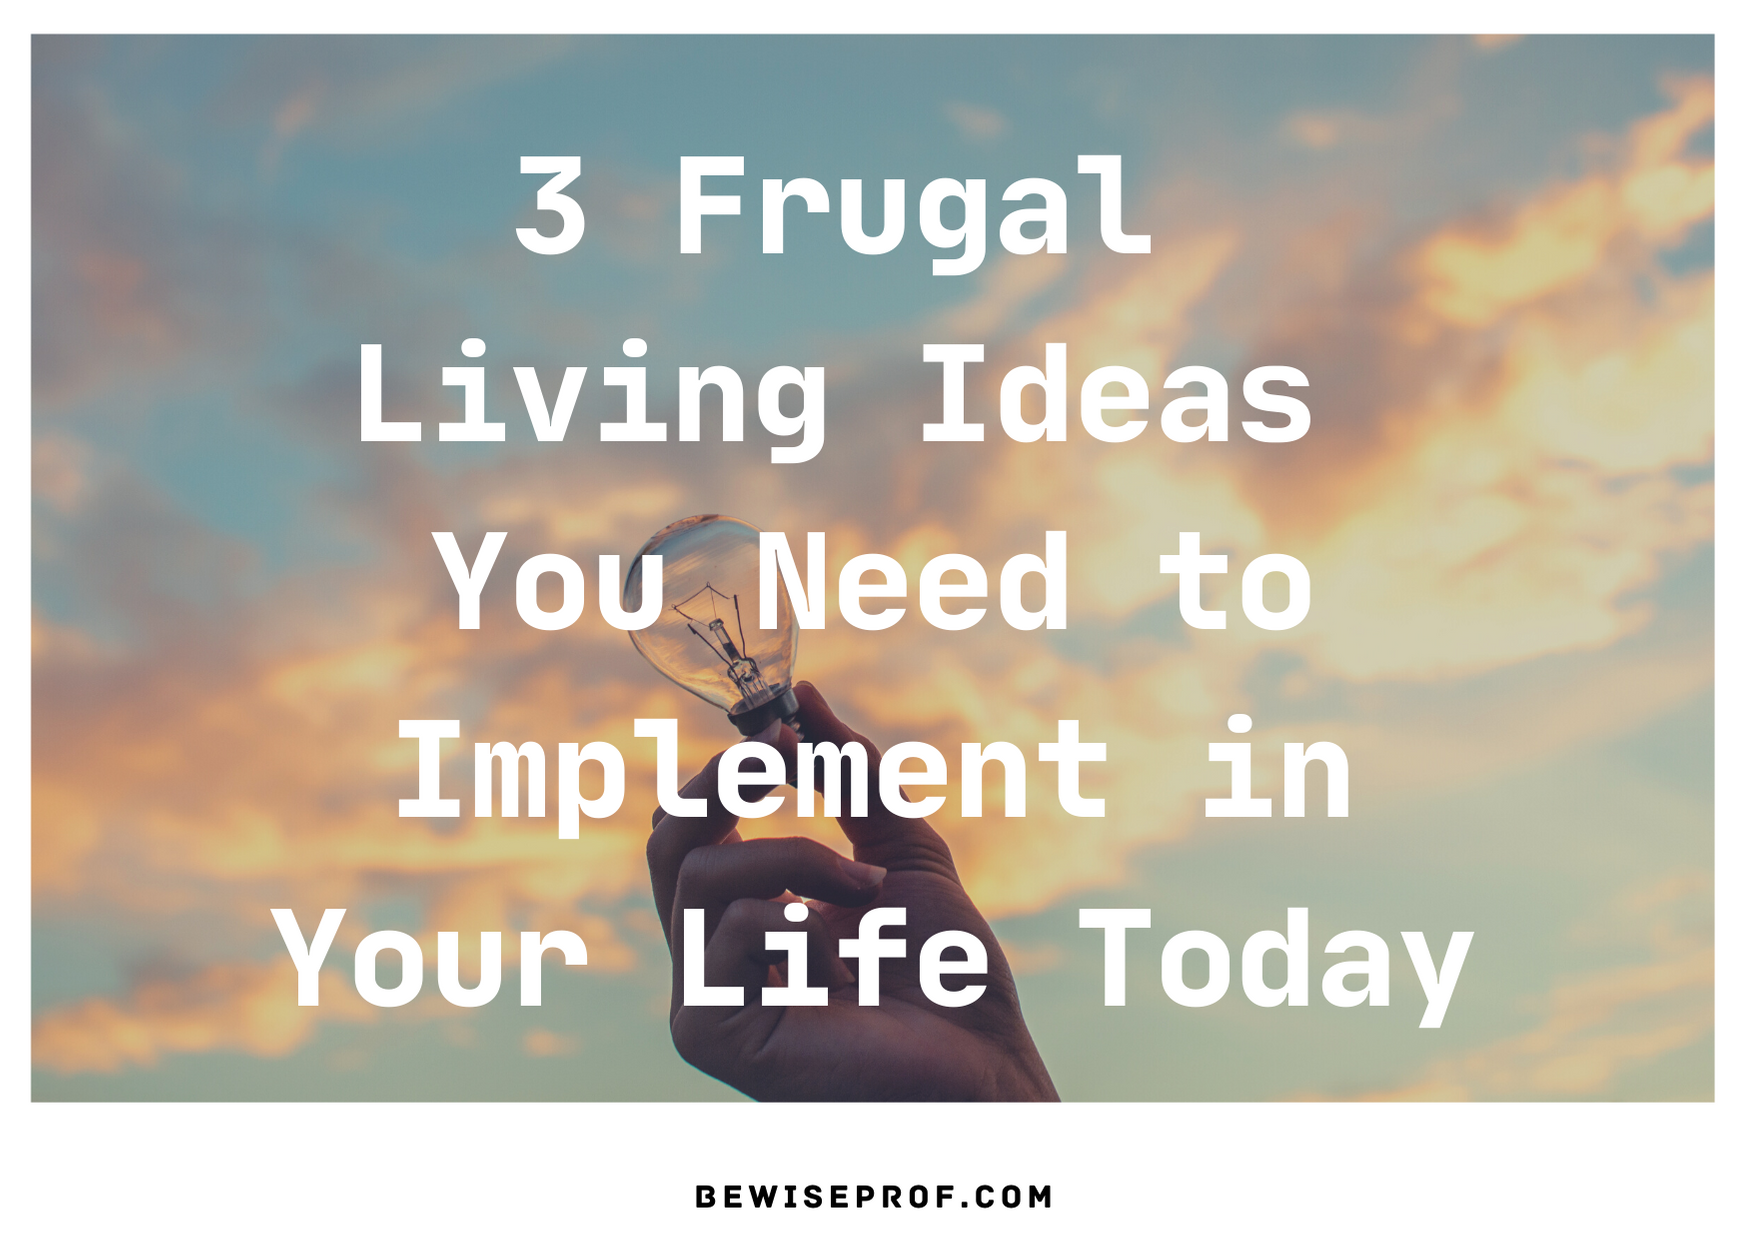 3 Frugal Living Ideas You Need to Implement in Your Life Today